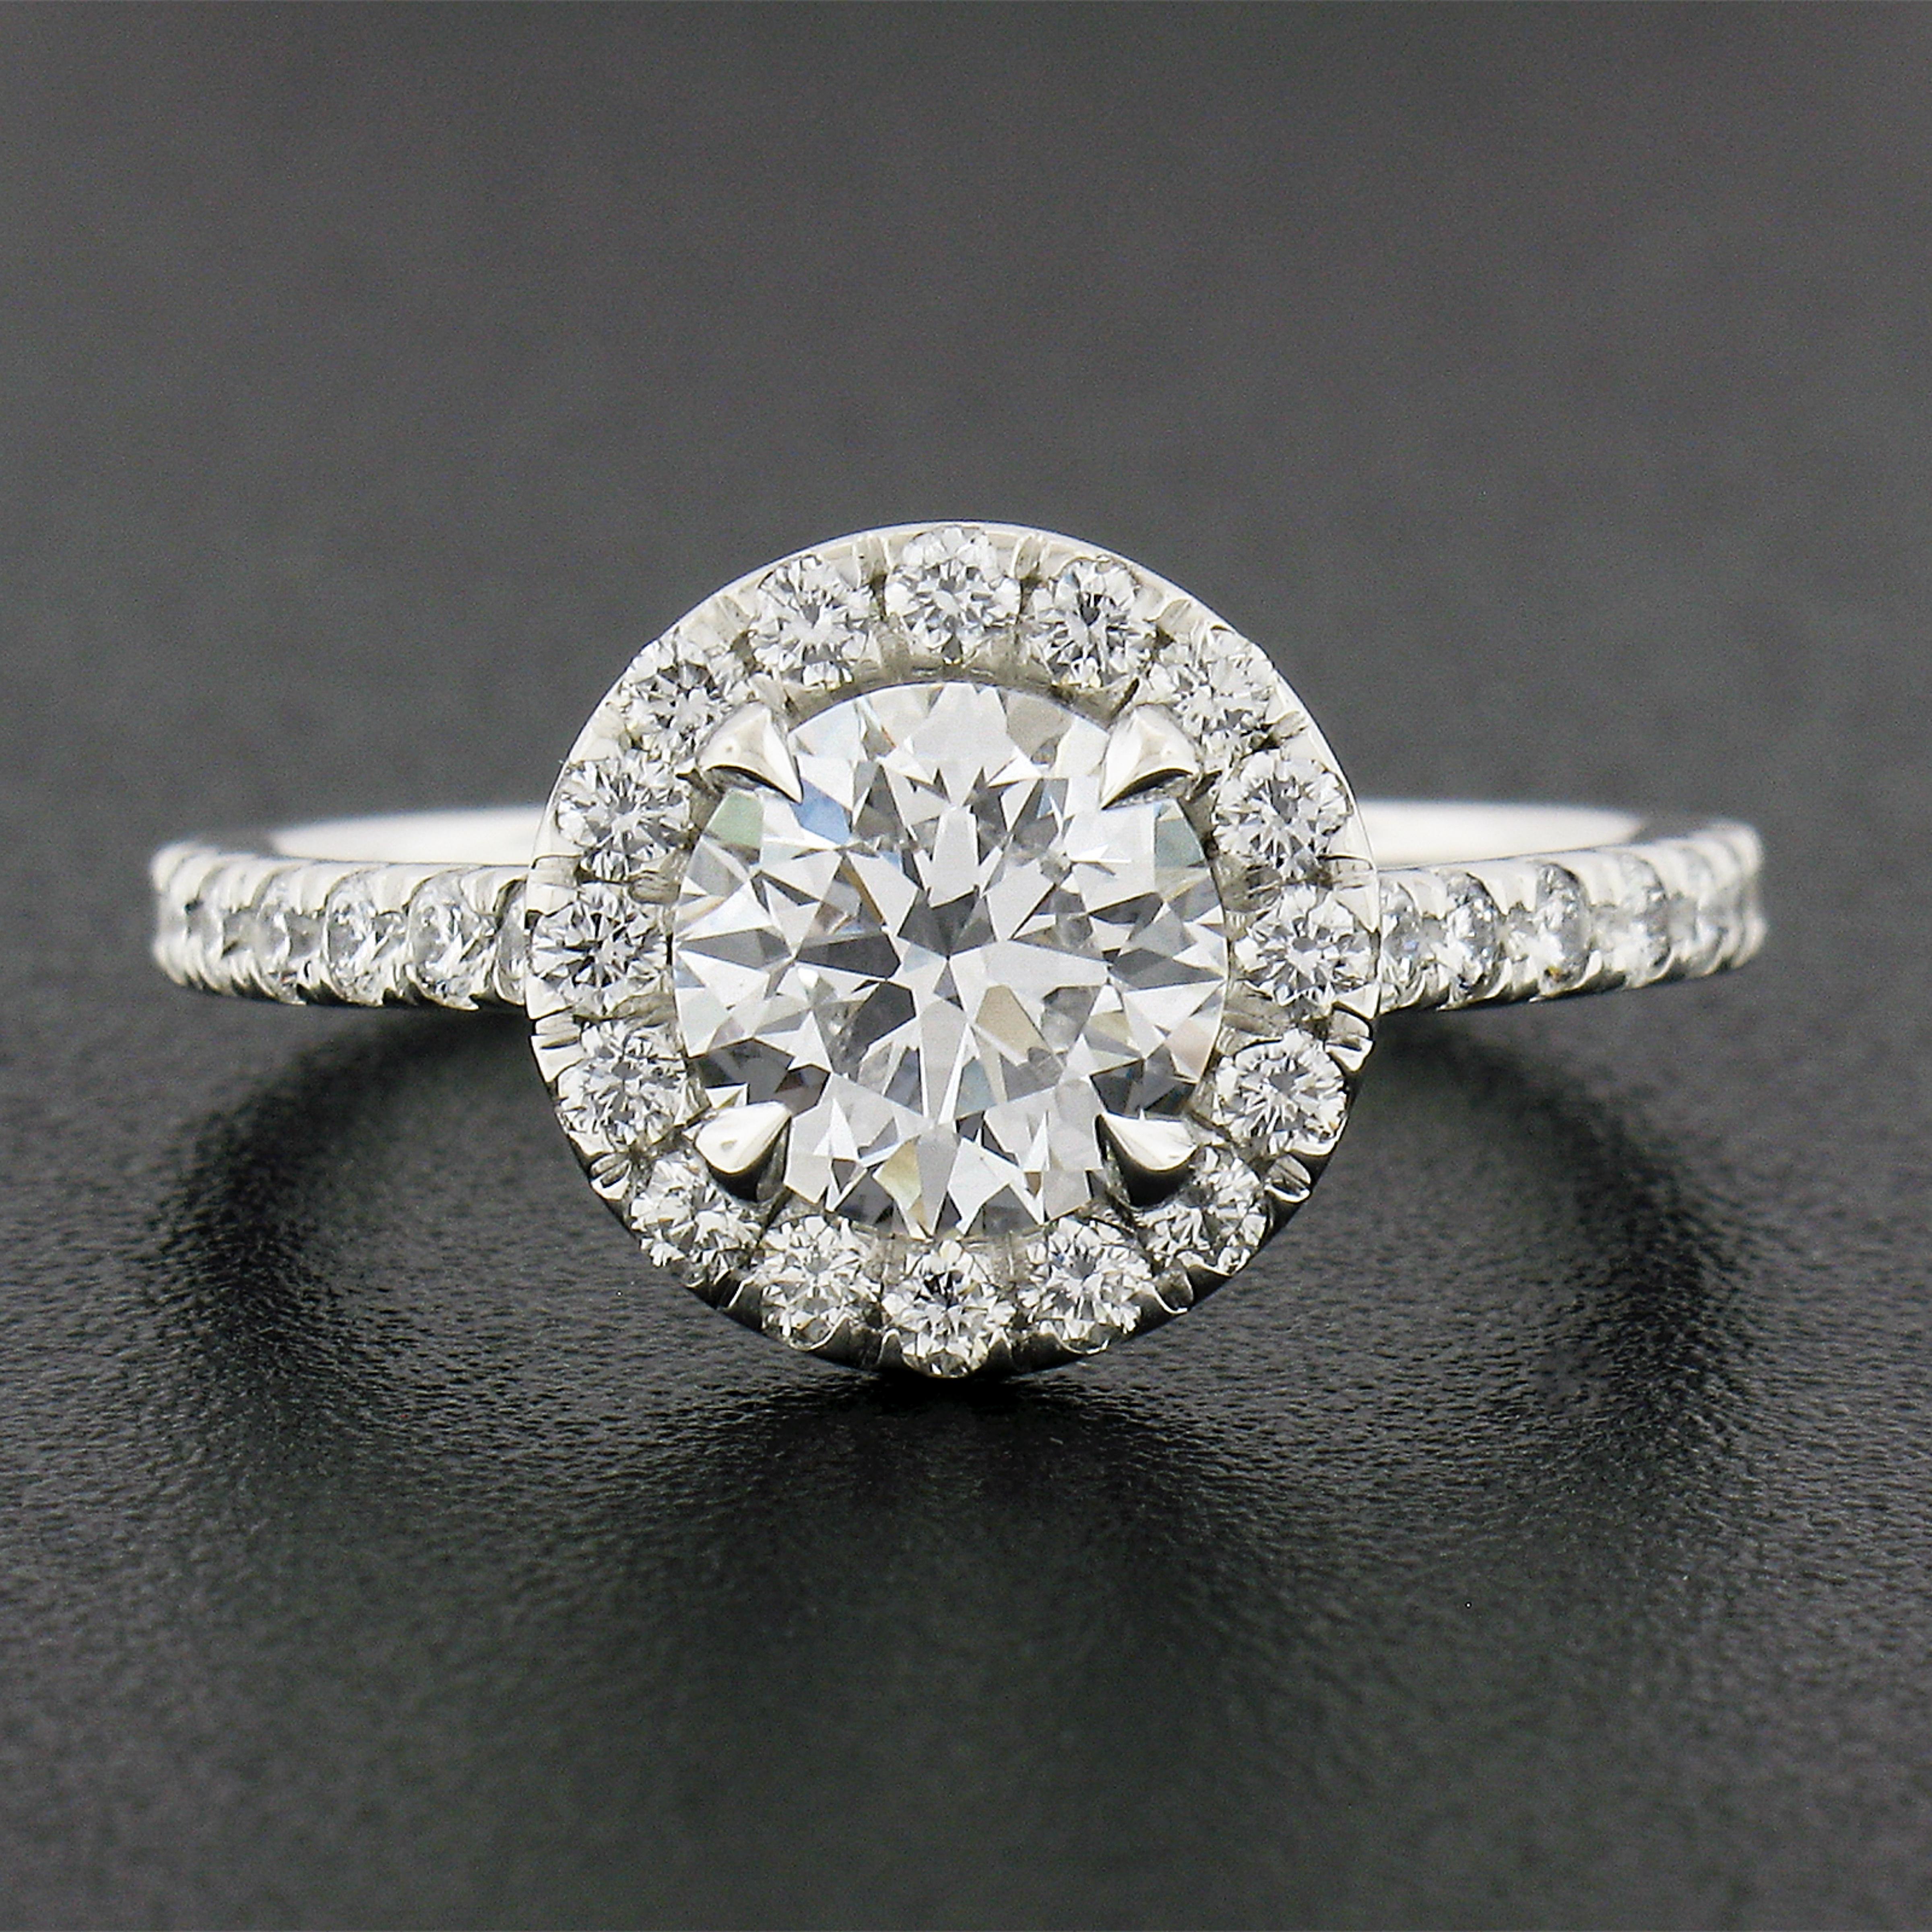 Here we have a gorgeous diamond engagement ring that is newly crafted from solid platinum. The ring features a stunning super high quality GIA certified, round brilliant cut diamond claw prong set at the center.The halo and both shoulders are neatly